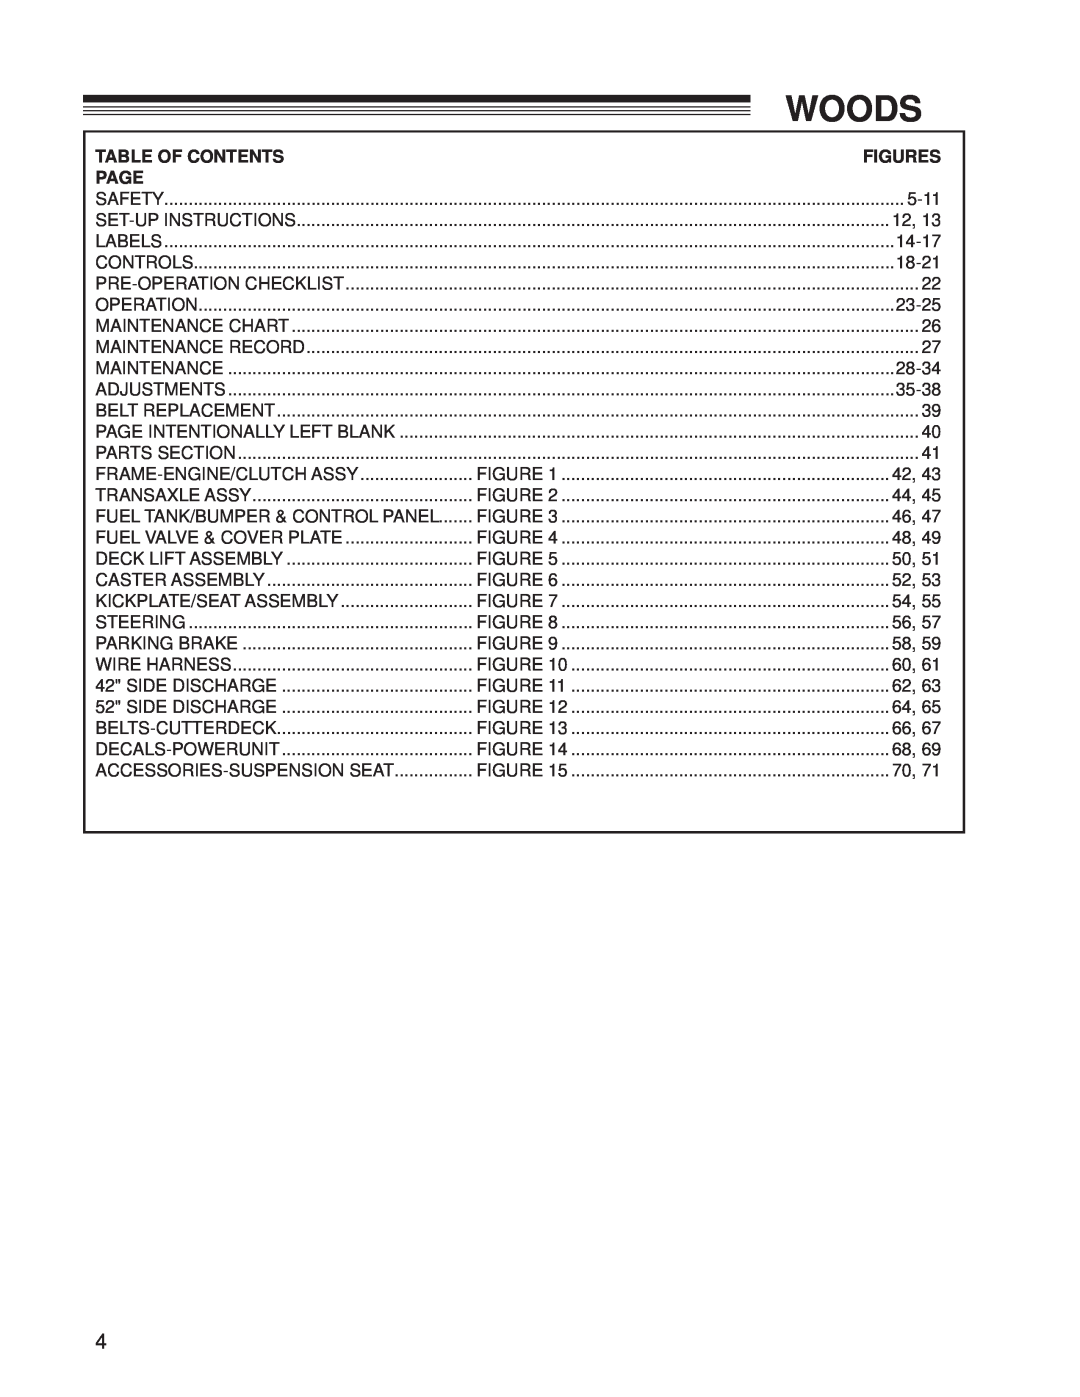 Woods Equipment CZR2652B, CZR2242B manual Woods, Table Of Contents, Figures, Page, 5-11, 14-17, 18-21, 23-25, 28-34, 35-38 